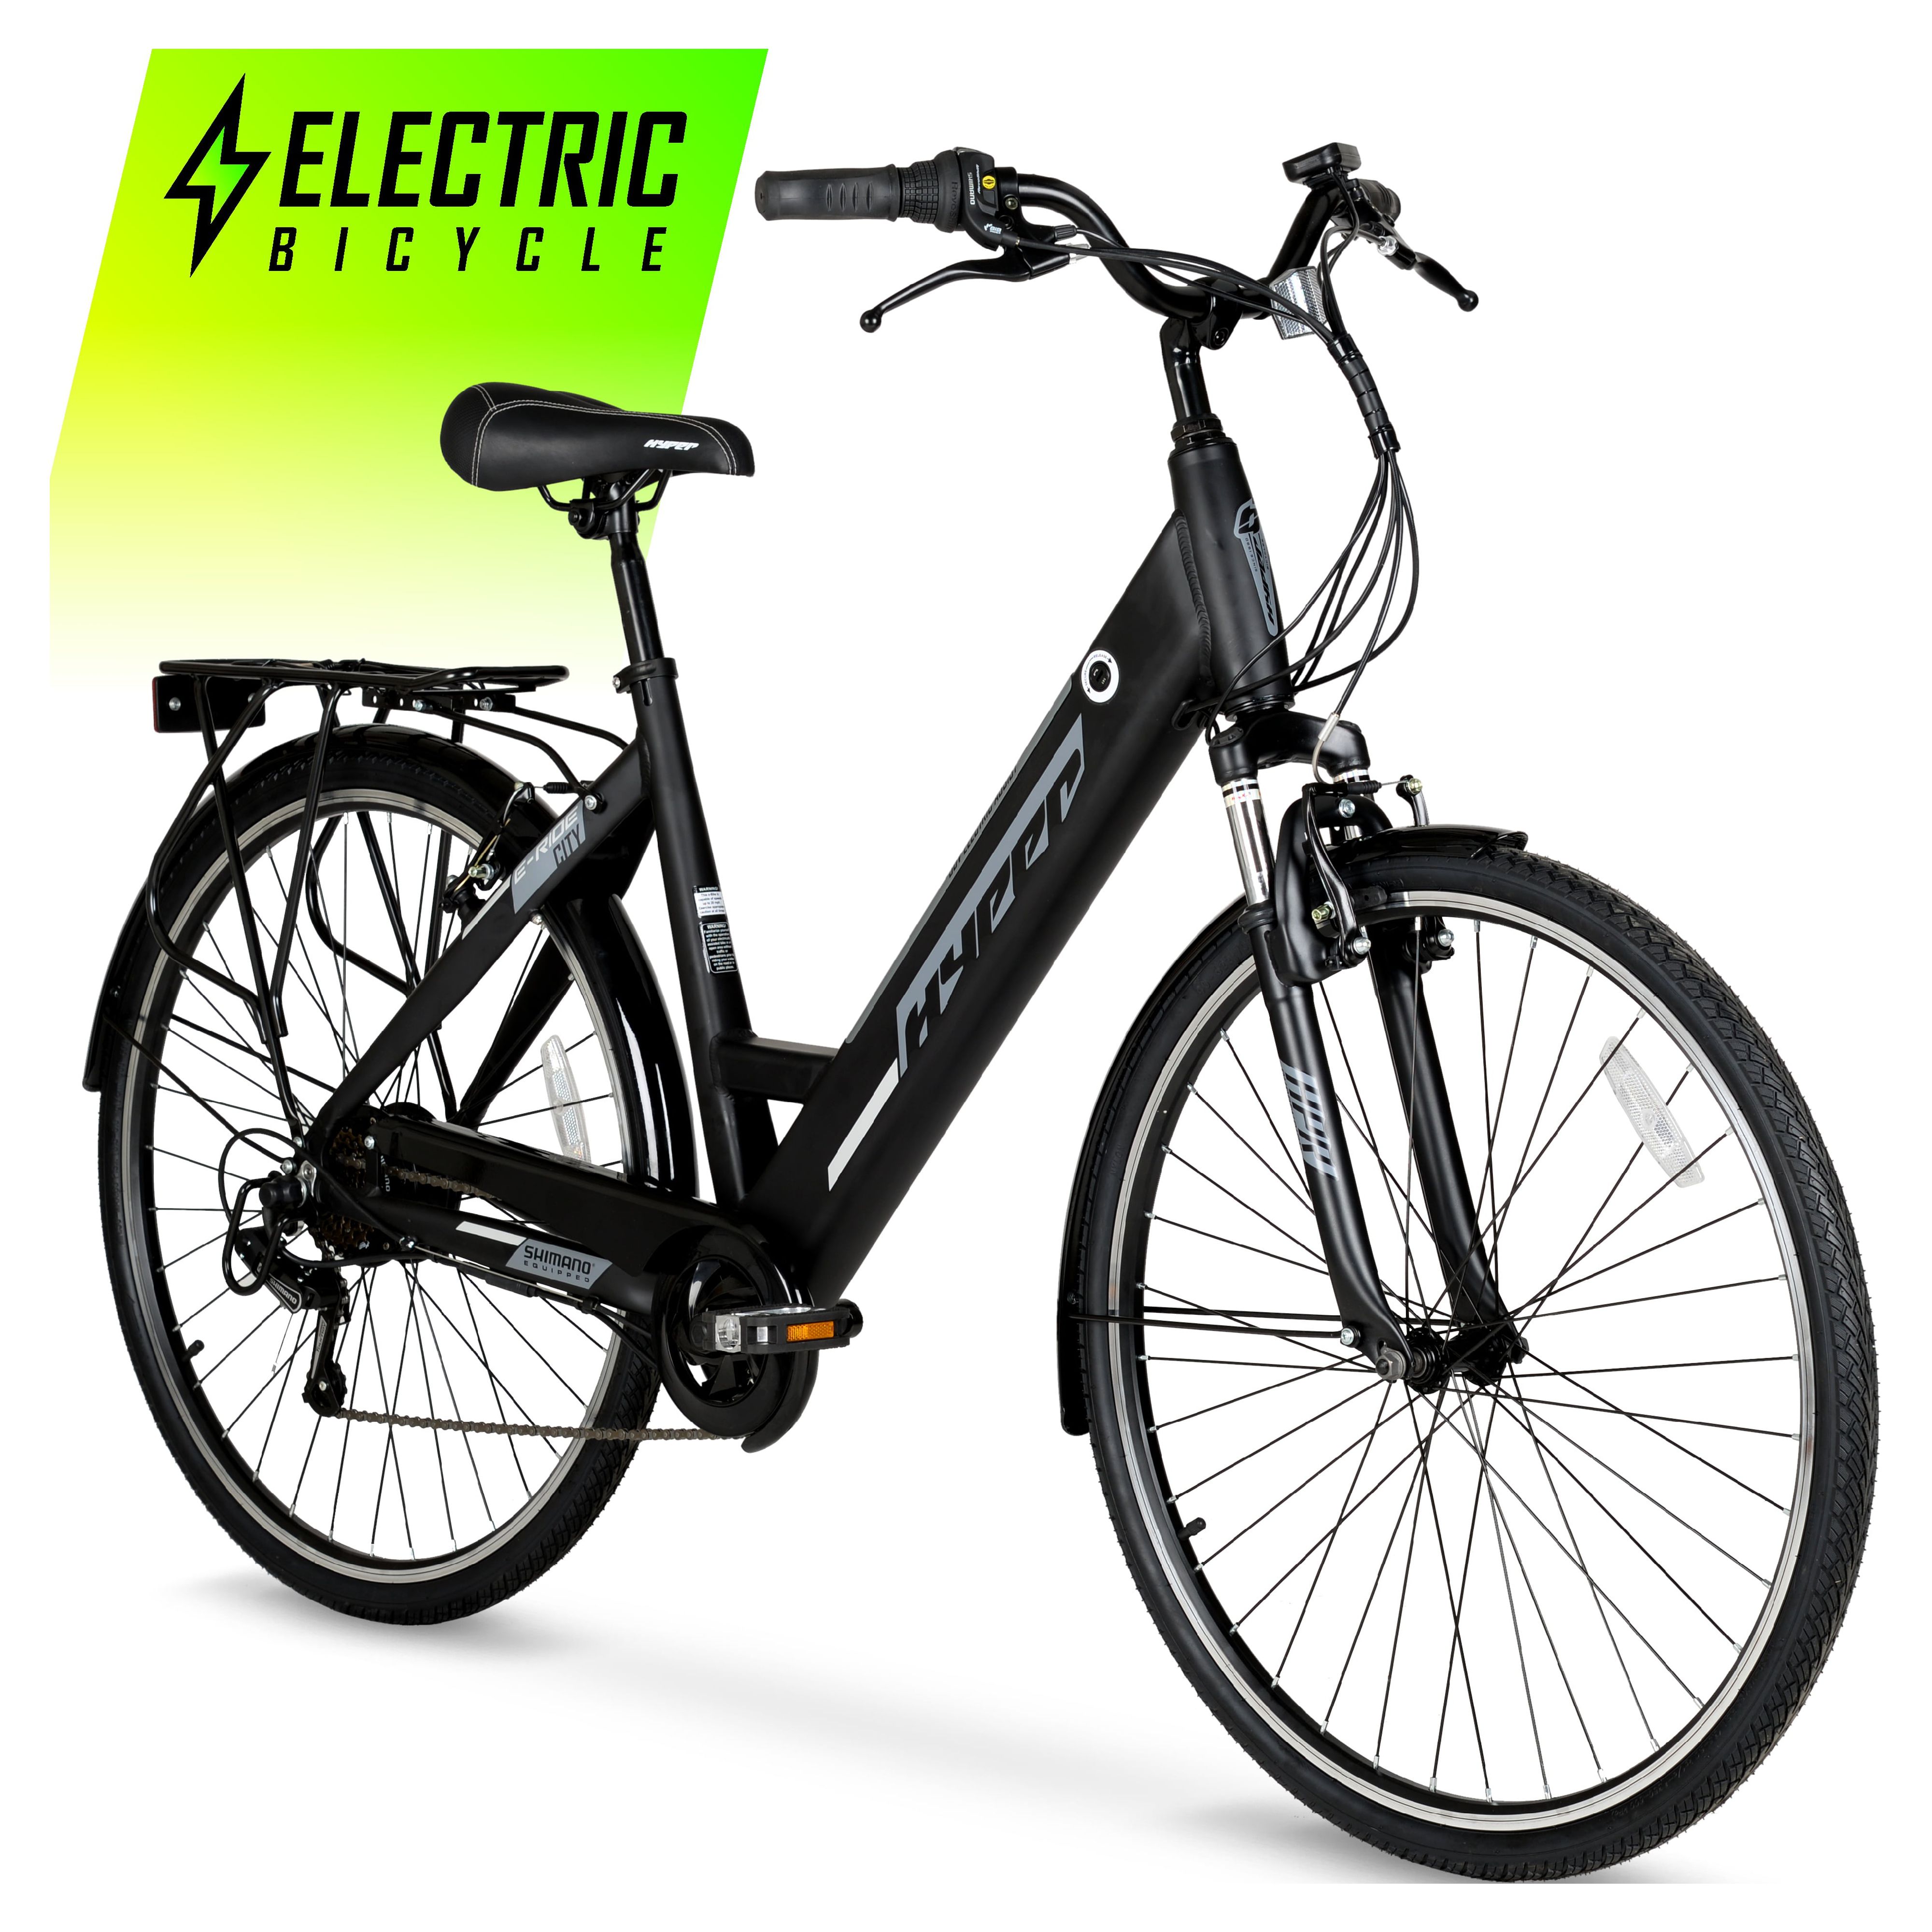 Hyper Bicycles E-Ride 700C 36V Electric Commuter E-Bike for Adults, Pedal-Assist, 250W Motor, Black - image 2 of 17